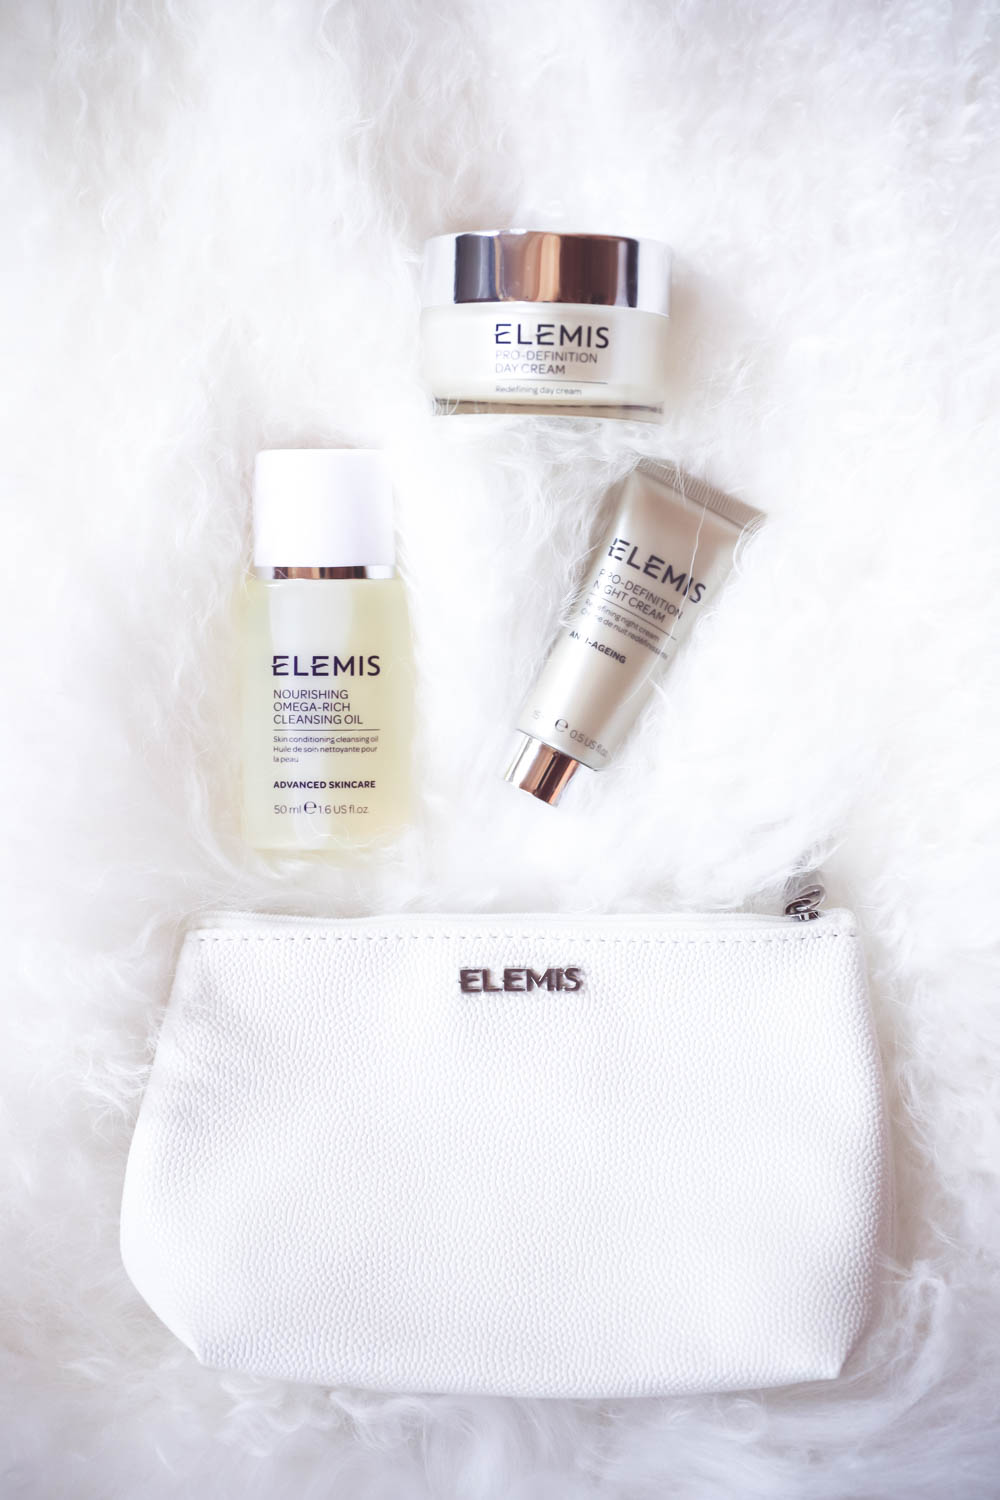 Elemis 3-Piece Set from QVC includes day and night creams and an oil cleanser